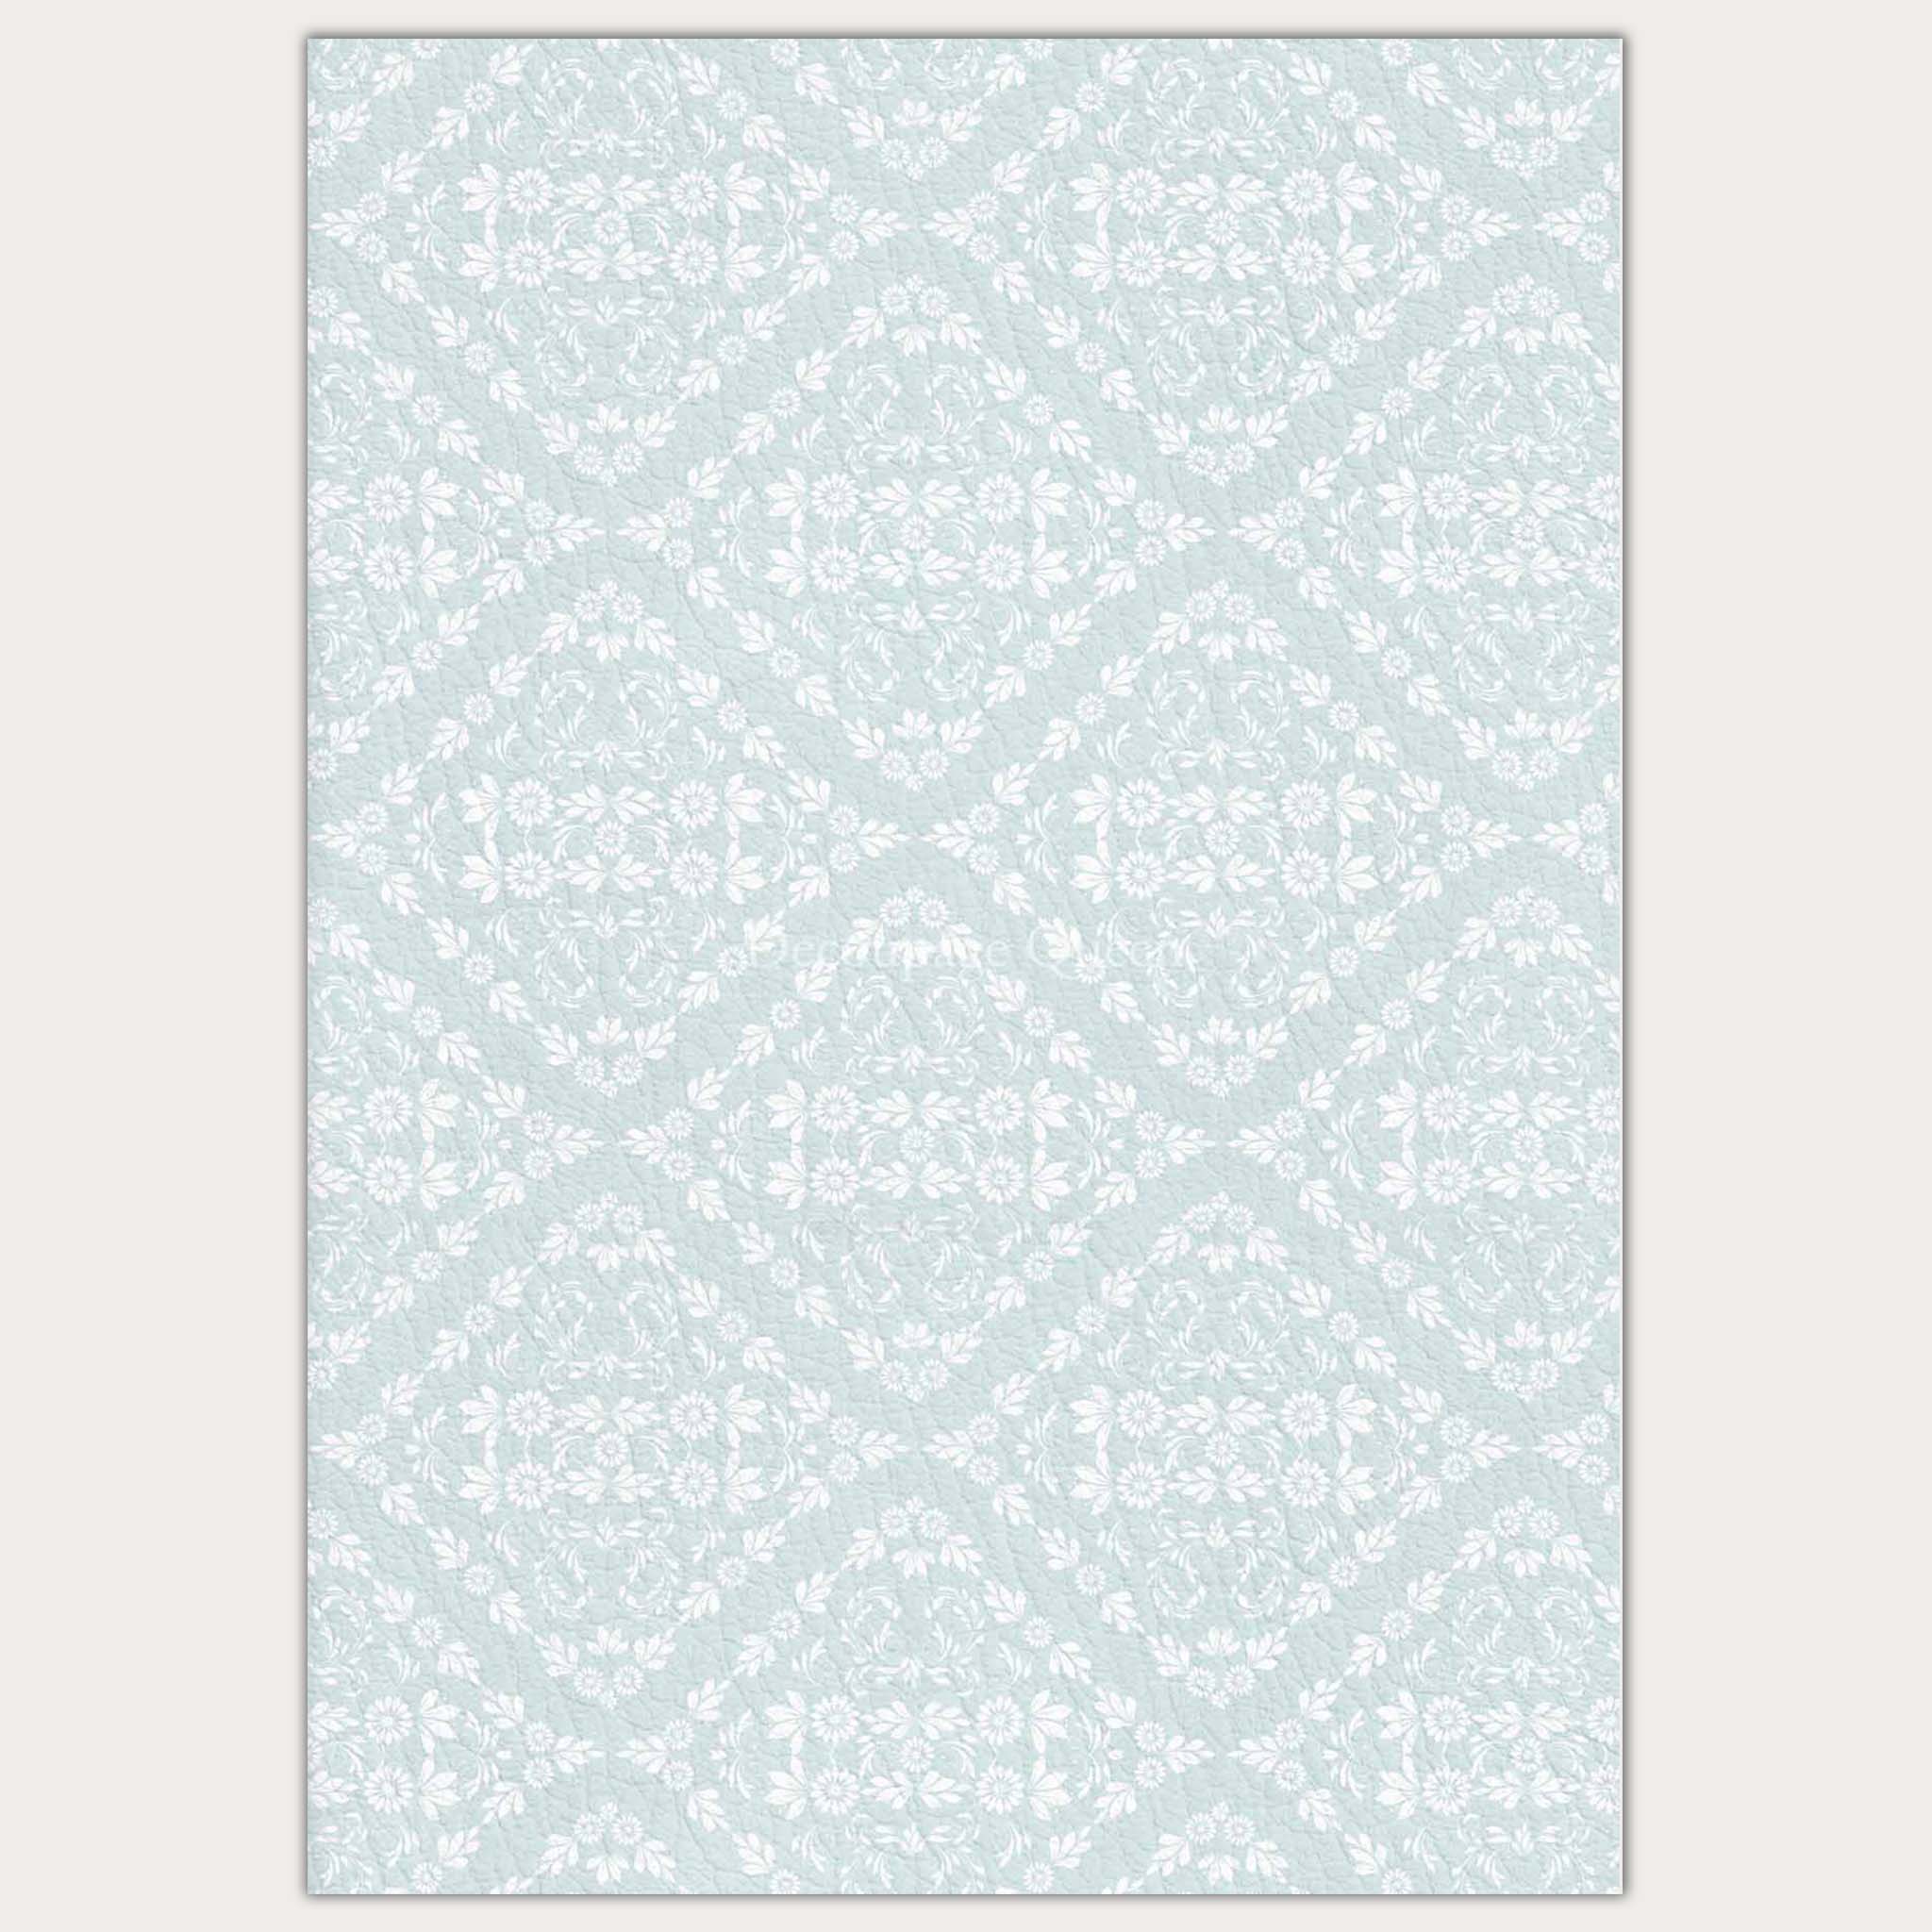 A3 rice paper that features quilted diamonds of dainty white flowers sit against a light blue background. Light beige borders are on the sides.